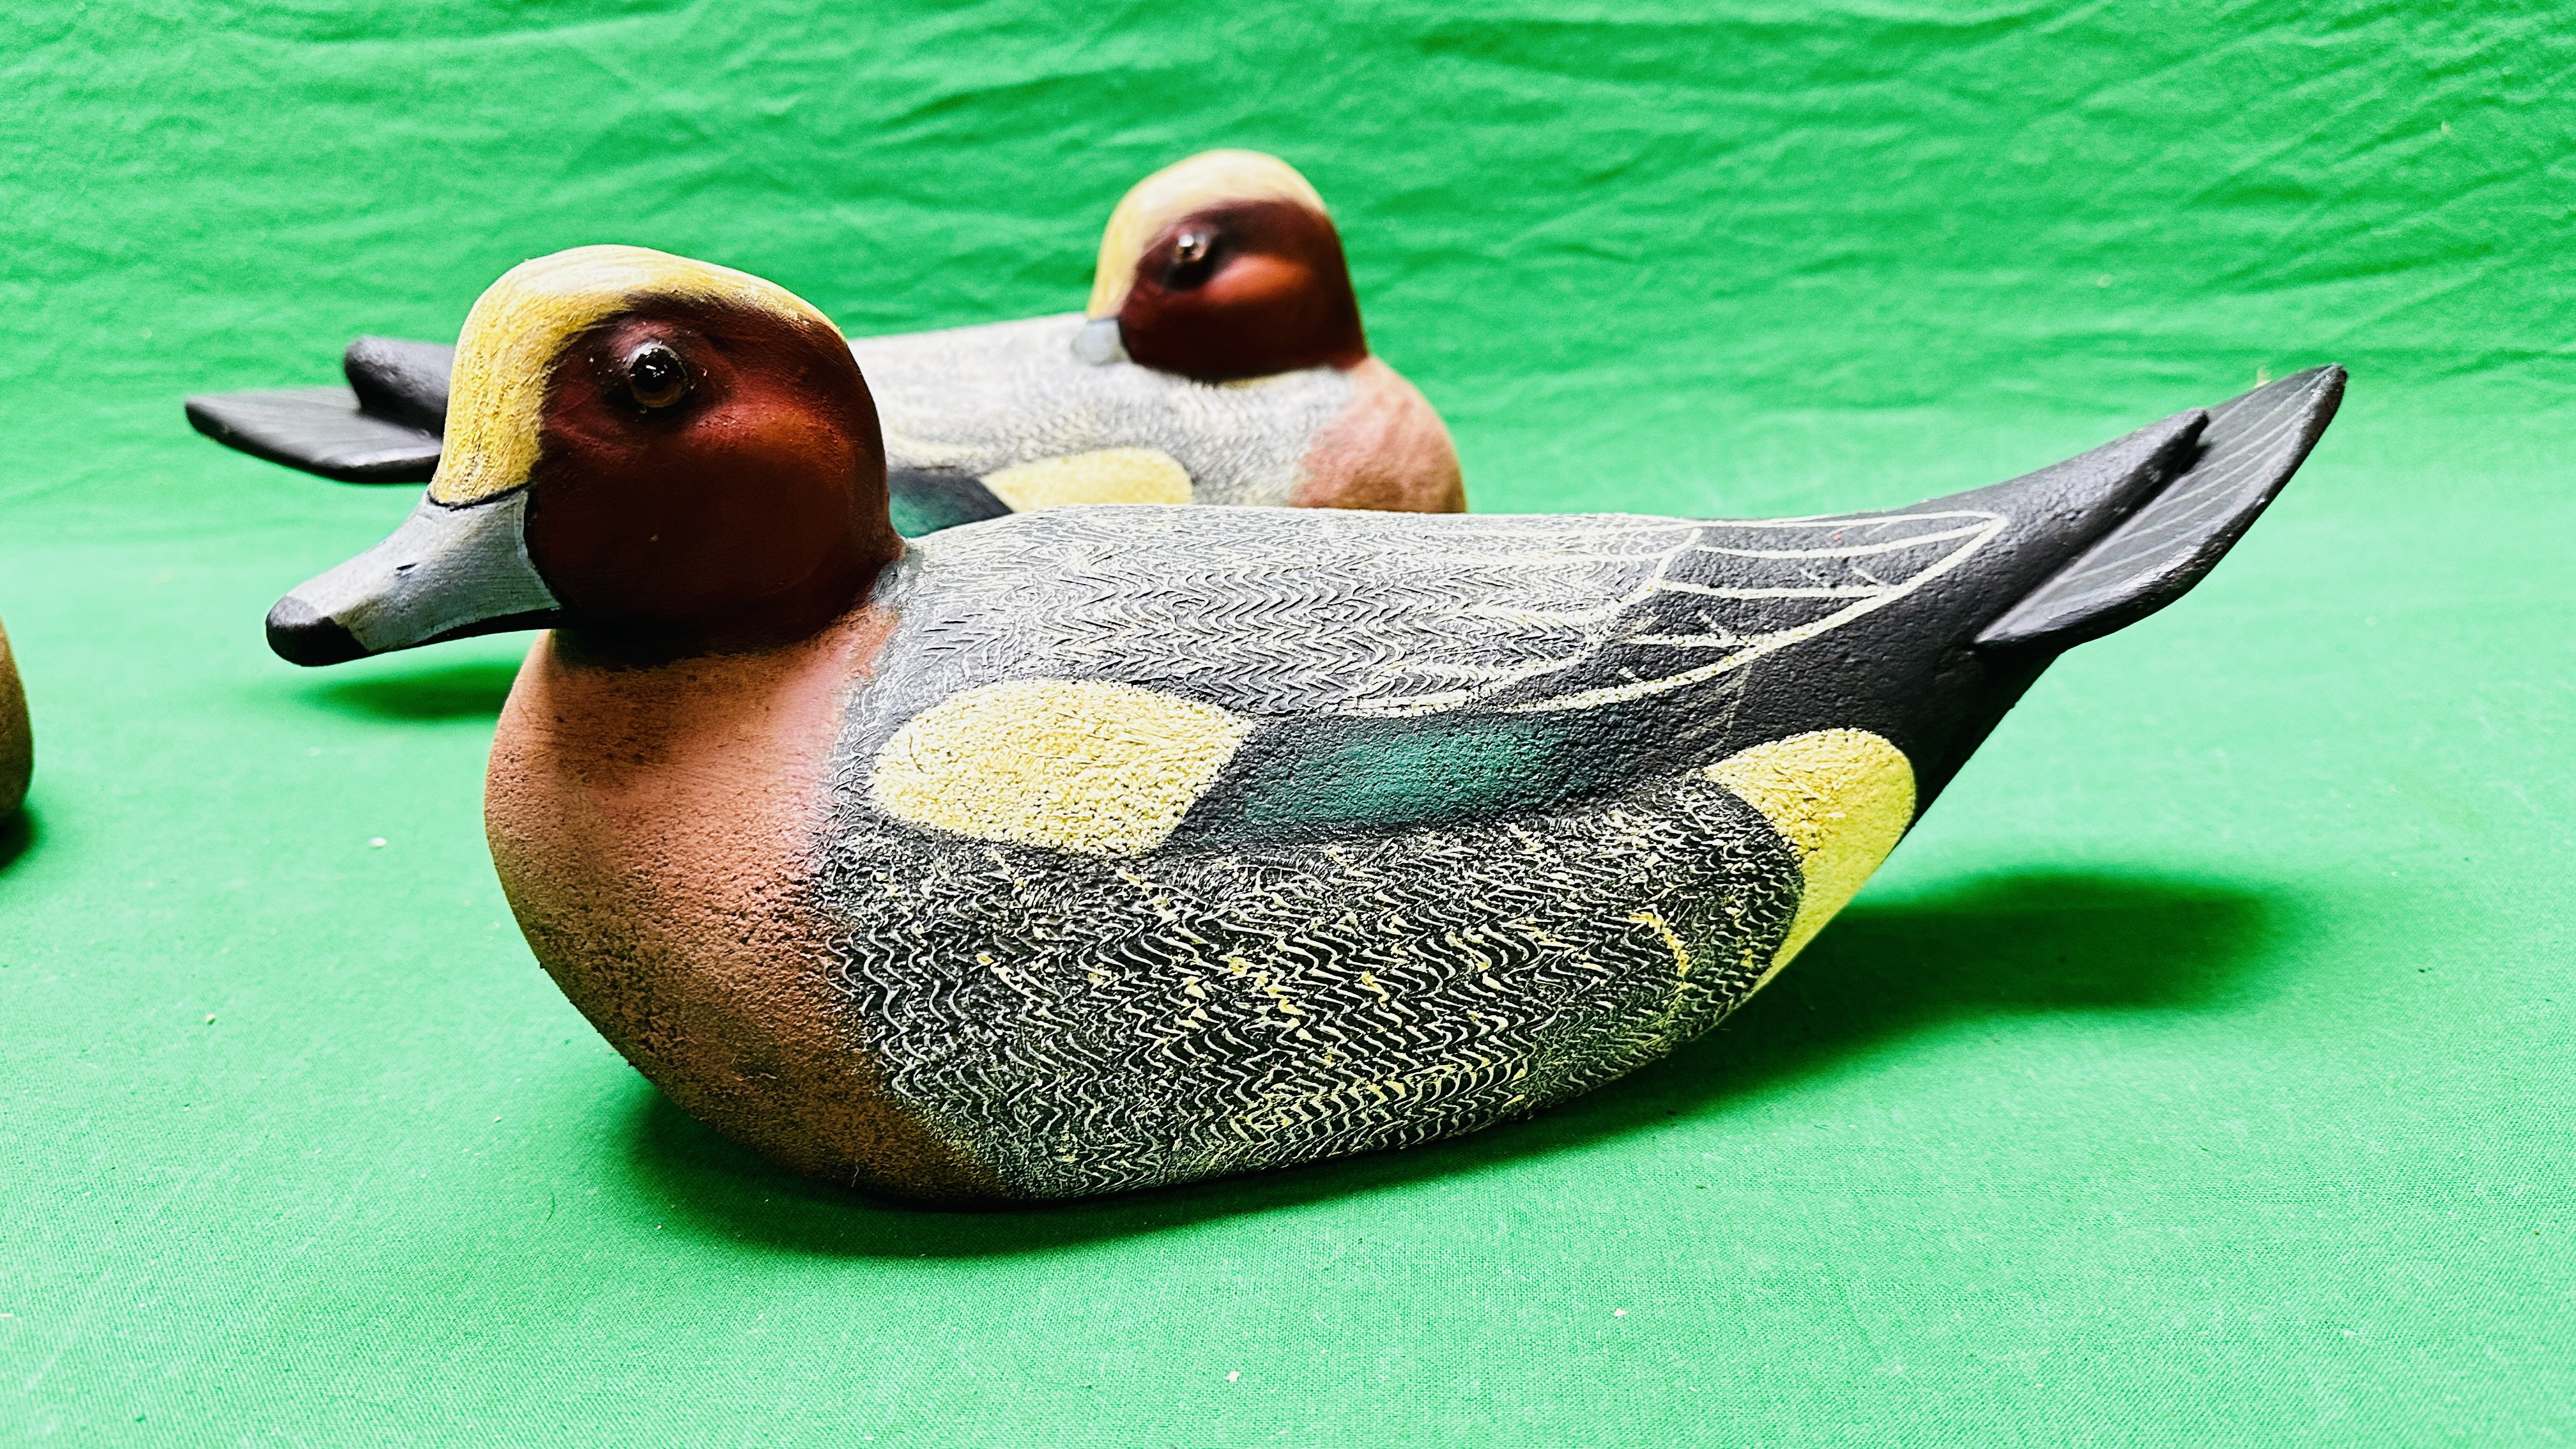 A HANDCRAFTED SET OF THREE DUCK DECOYS HAVING HANDPAINTED DETAIL AND GLASS EYES. - Image 2 of 8